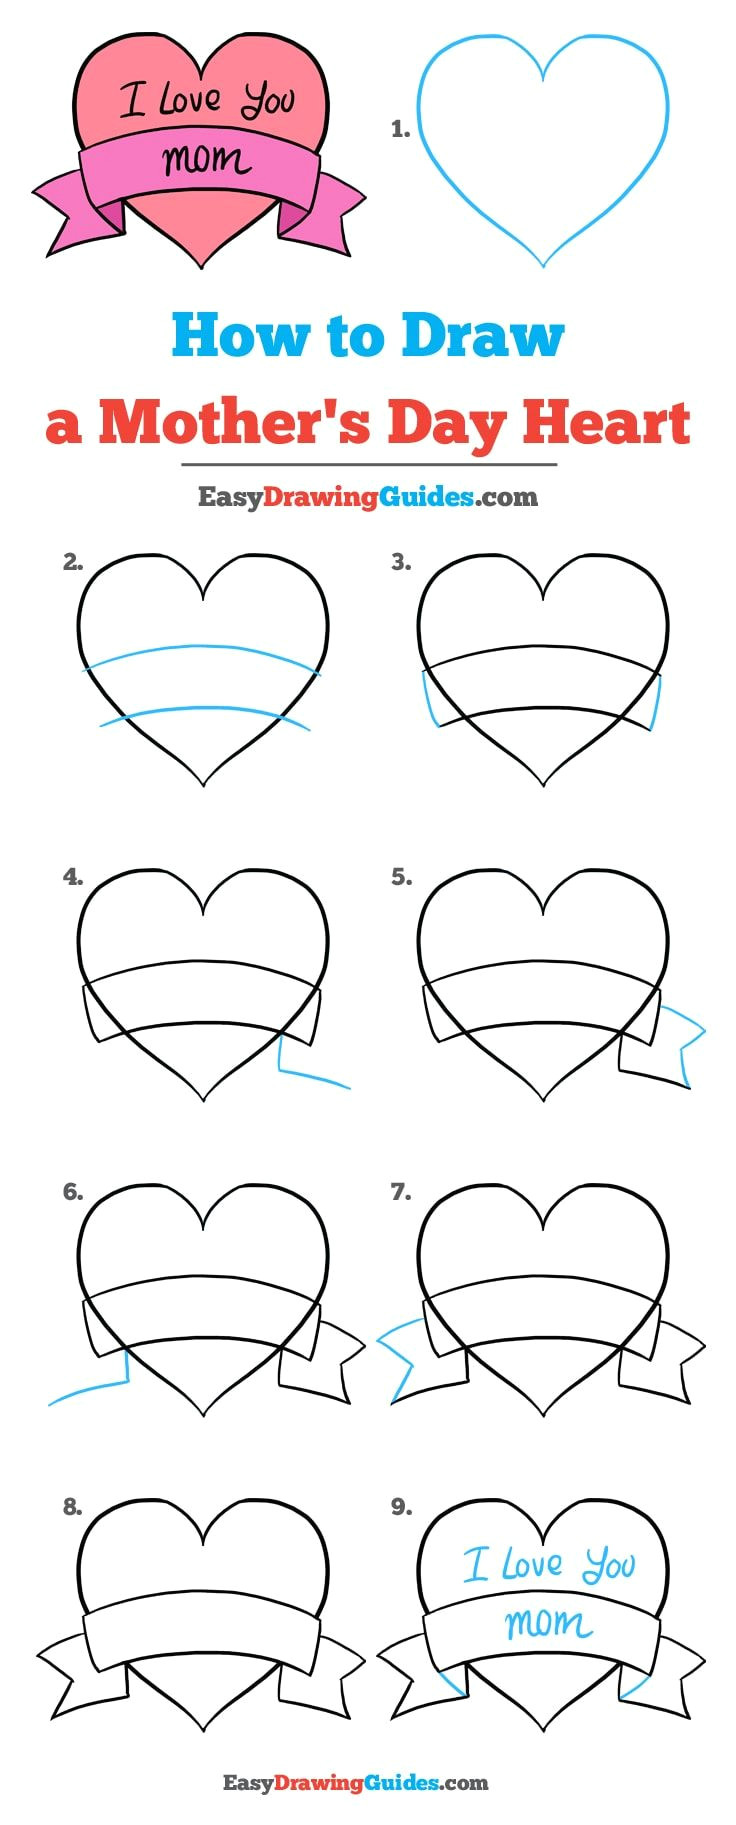 Easy Drawings Guides How to Draw A Mother S Day Heart Really Easy Drawing Tutorial